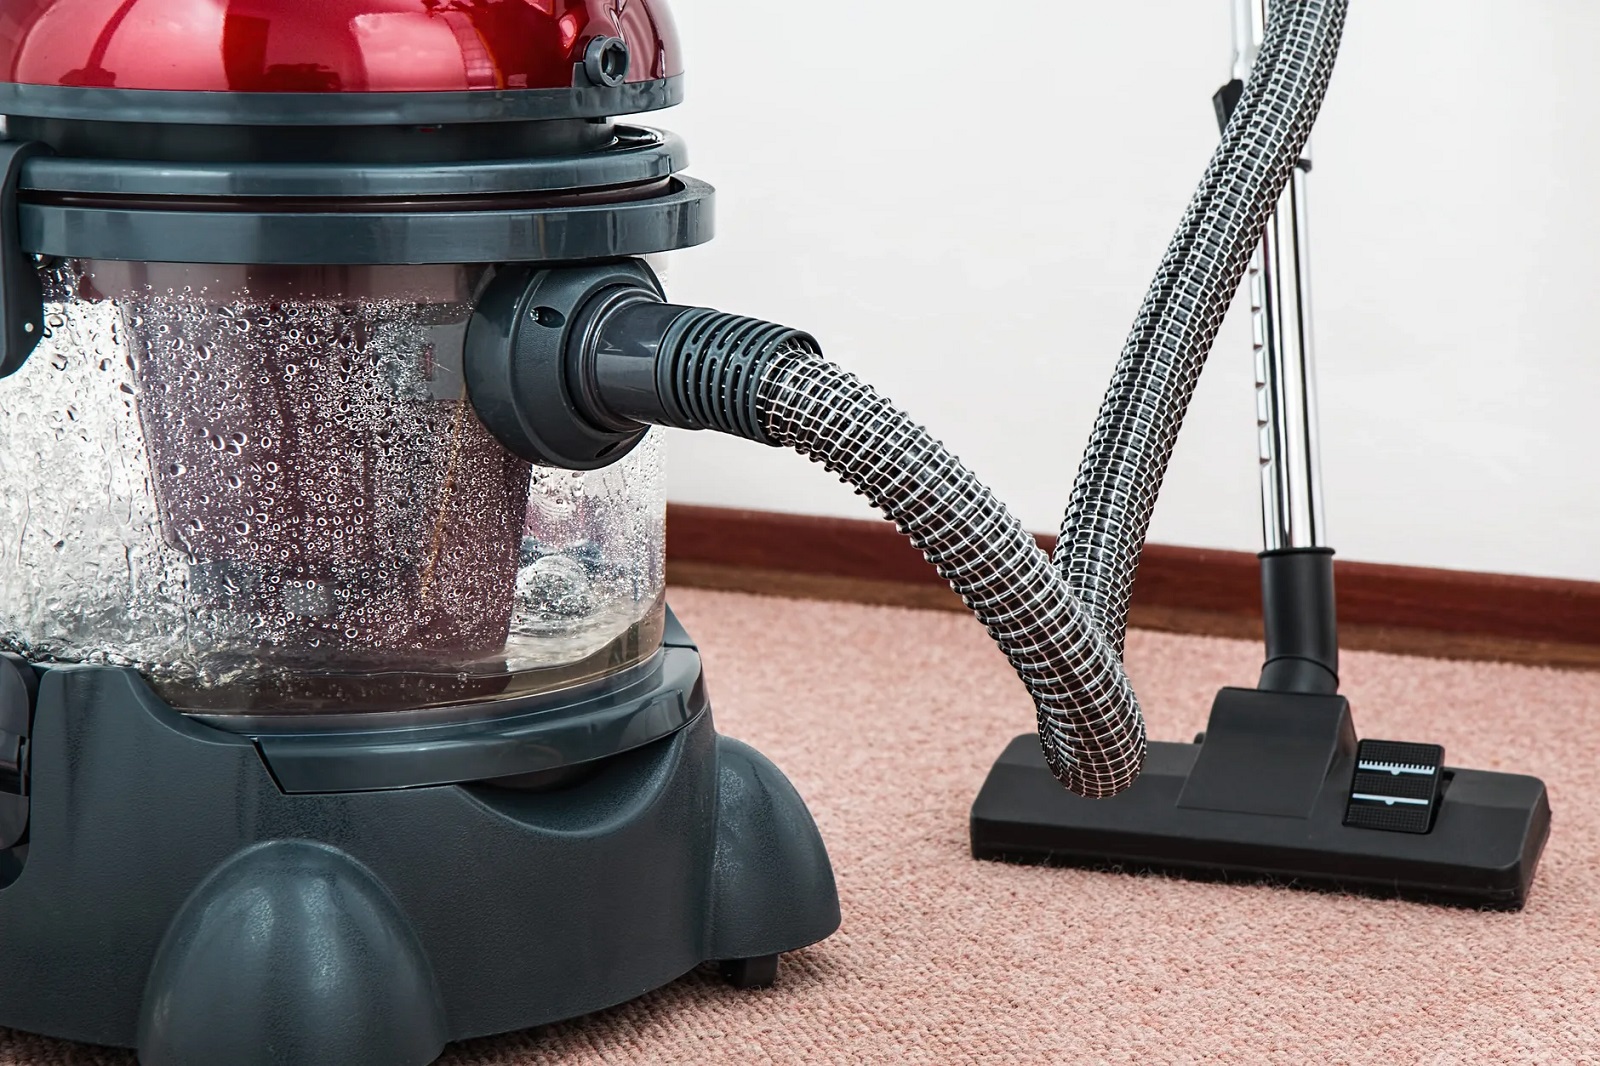 Carpet Cleaning Equipment’s in Budget for Making Carpet Long Lasting